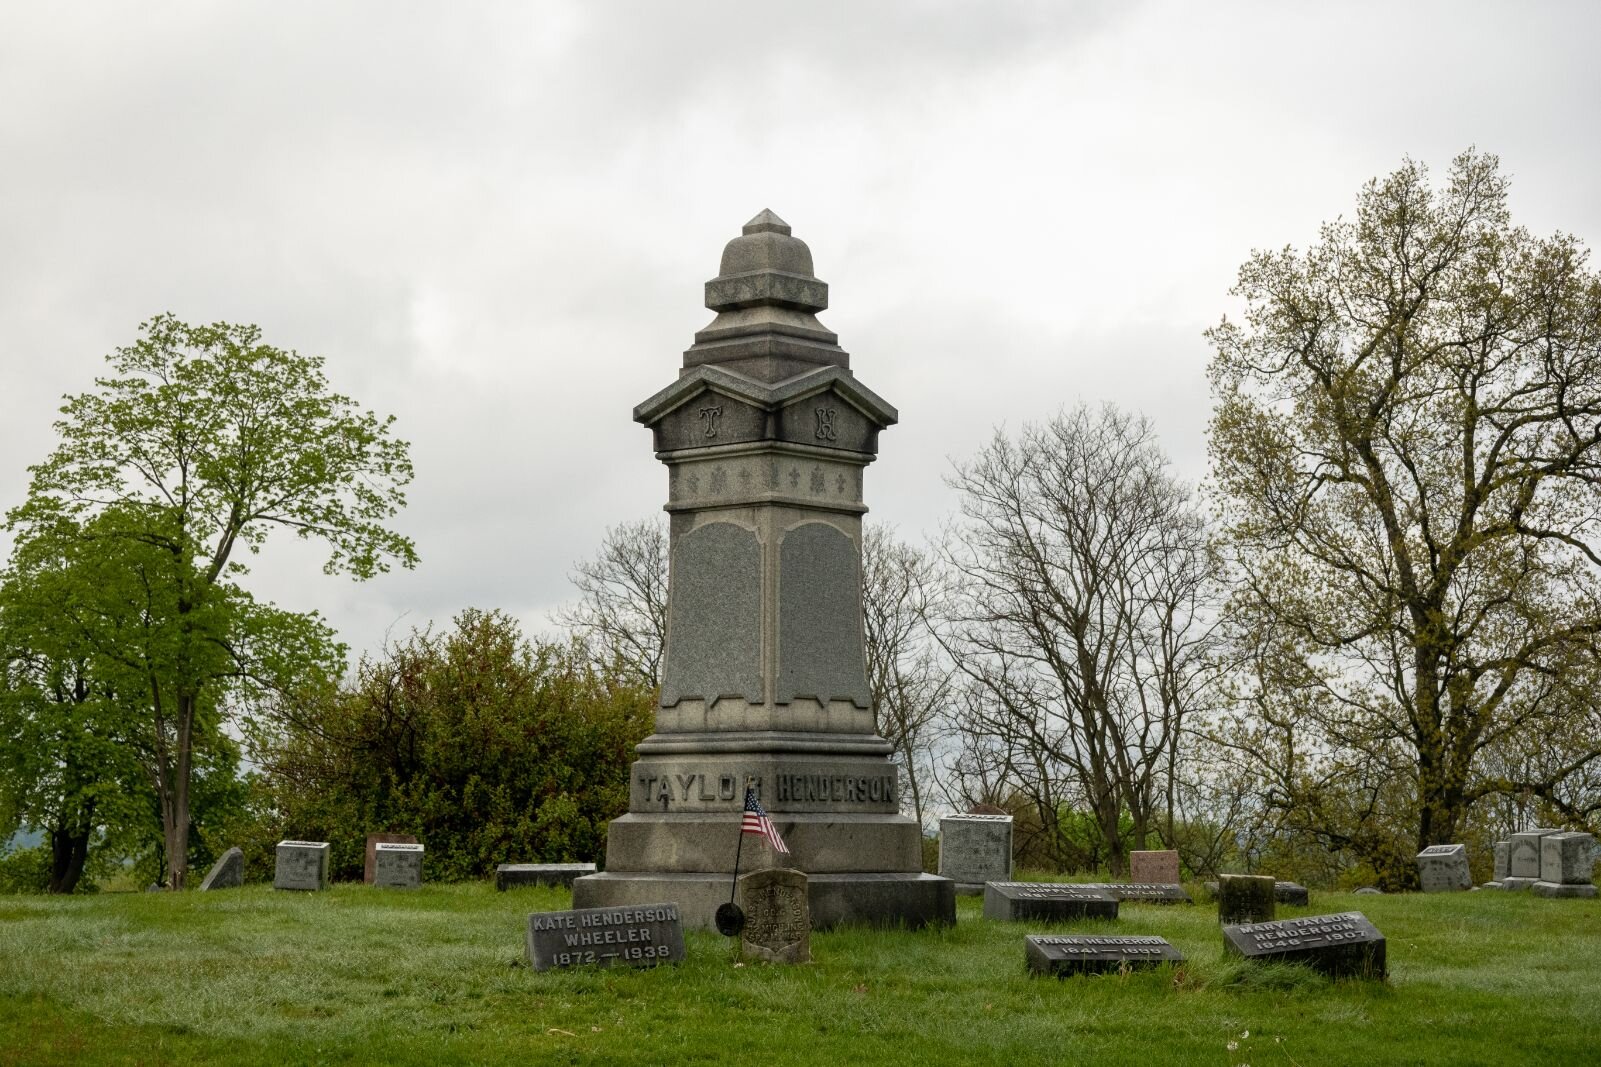 Family obelisks often recognized the connection of two or more families, with headstones for members of related families adjacent to it. Shown here is the obelisk that marks the burial plot for Frank and Mary (Taylor) Henderson and various members of